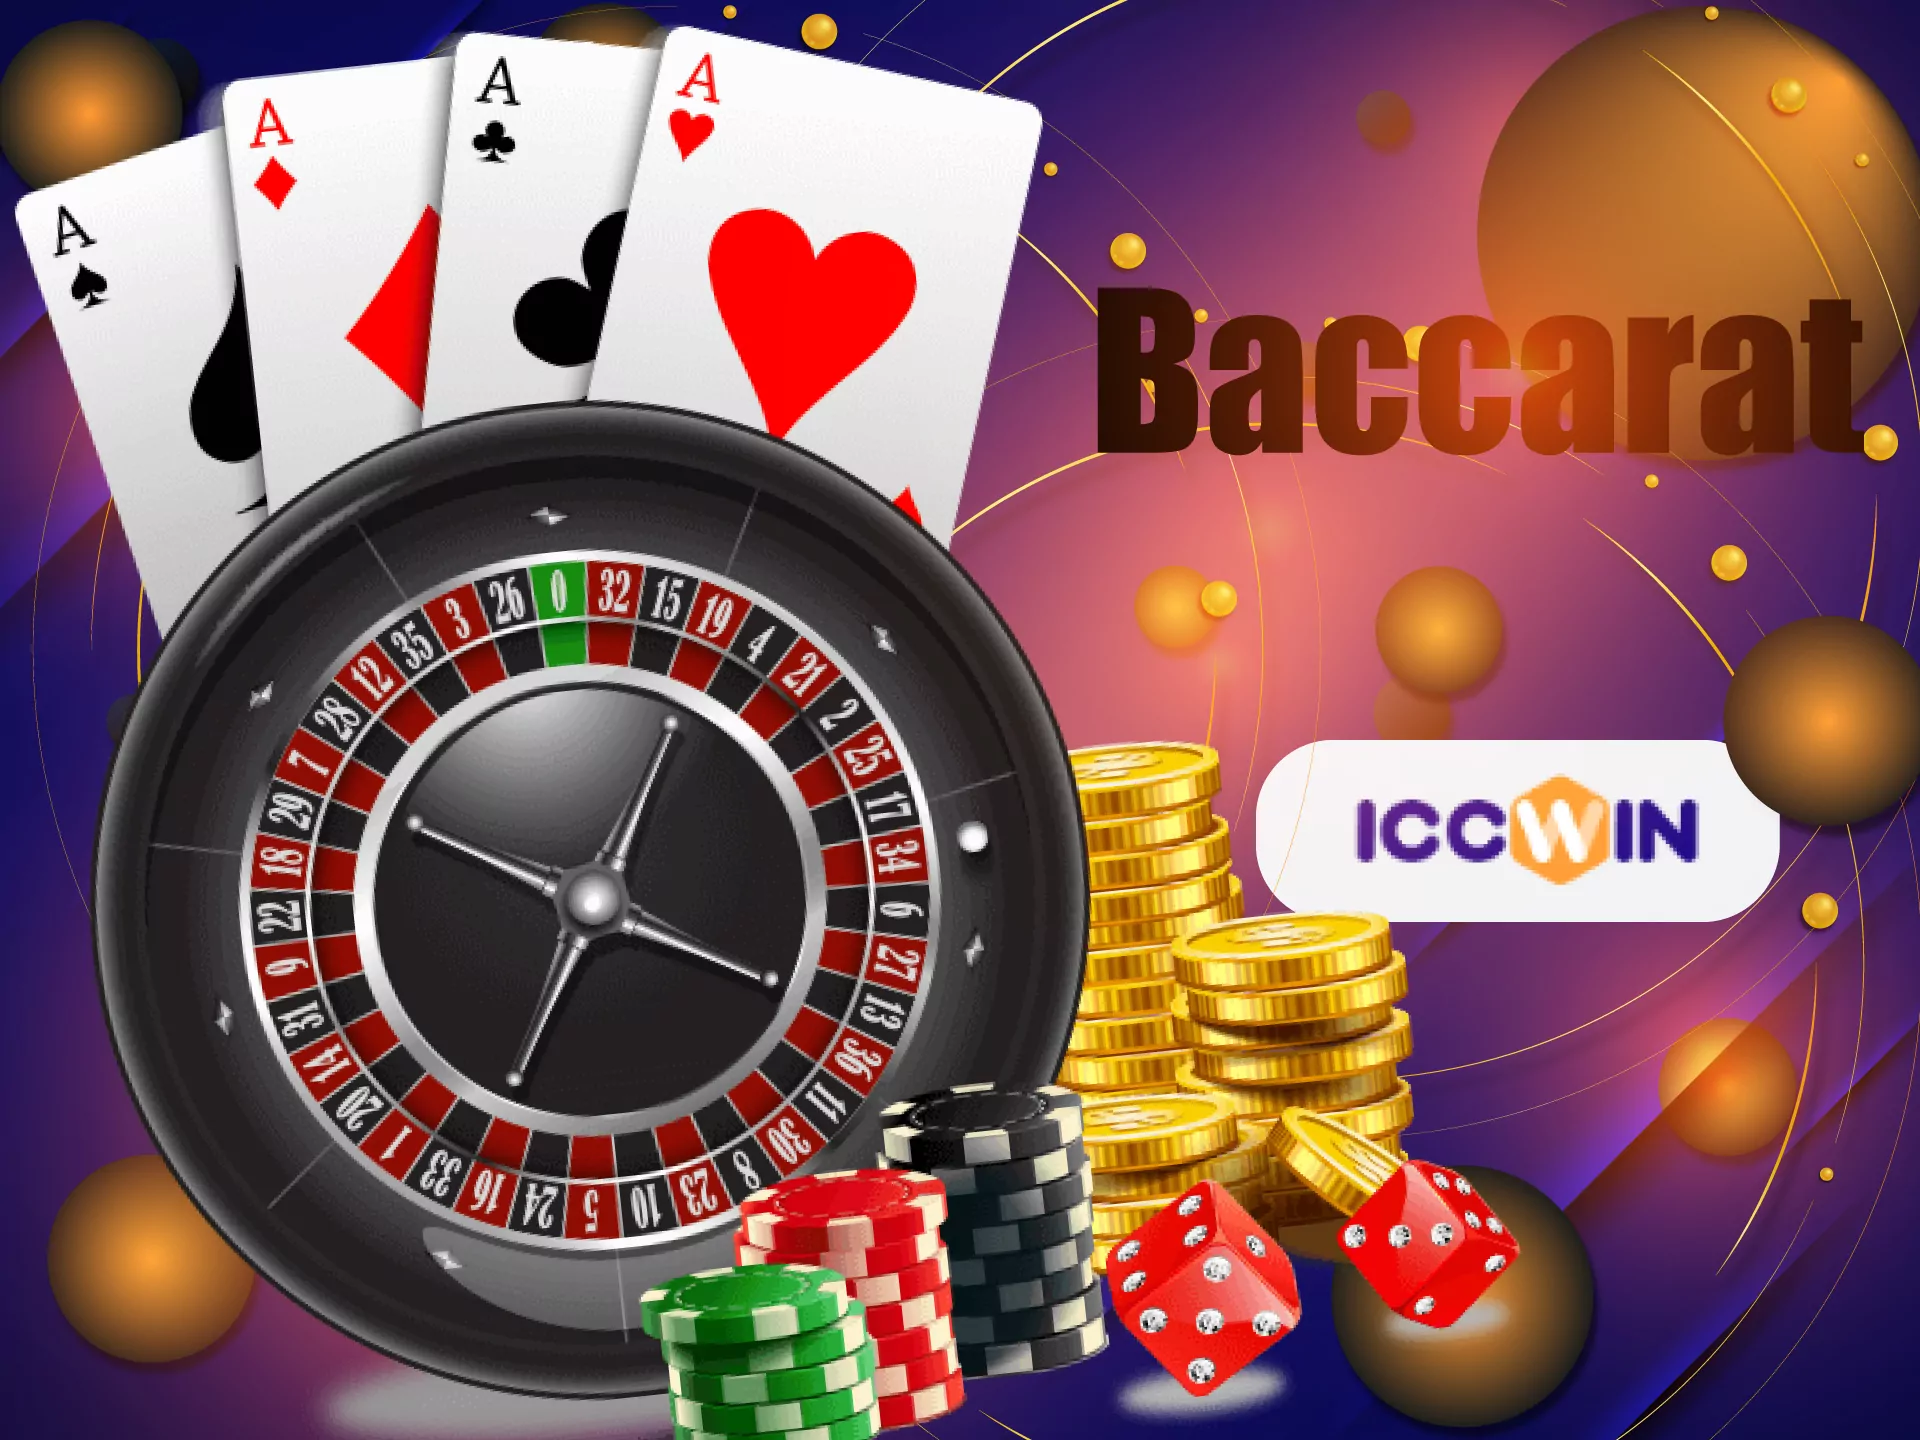 Baccarat games are available in the ICCWIN casino.